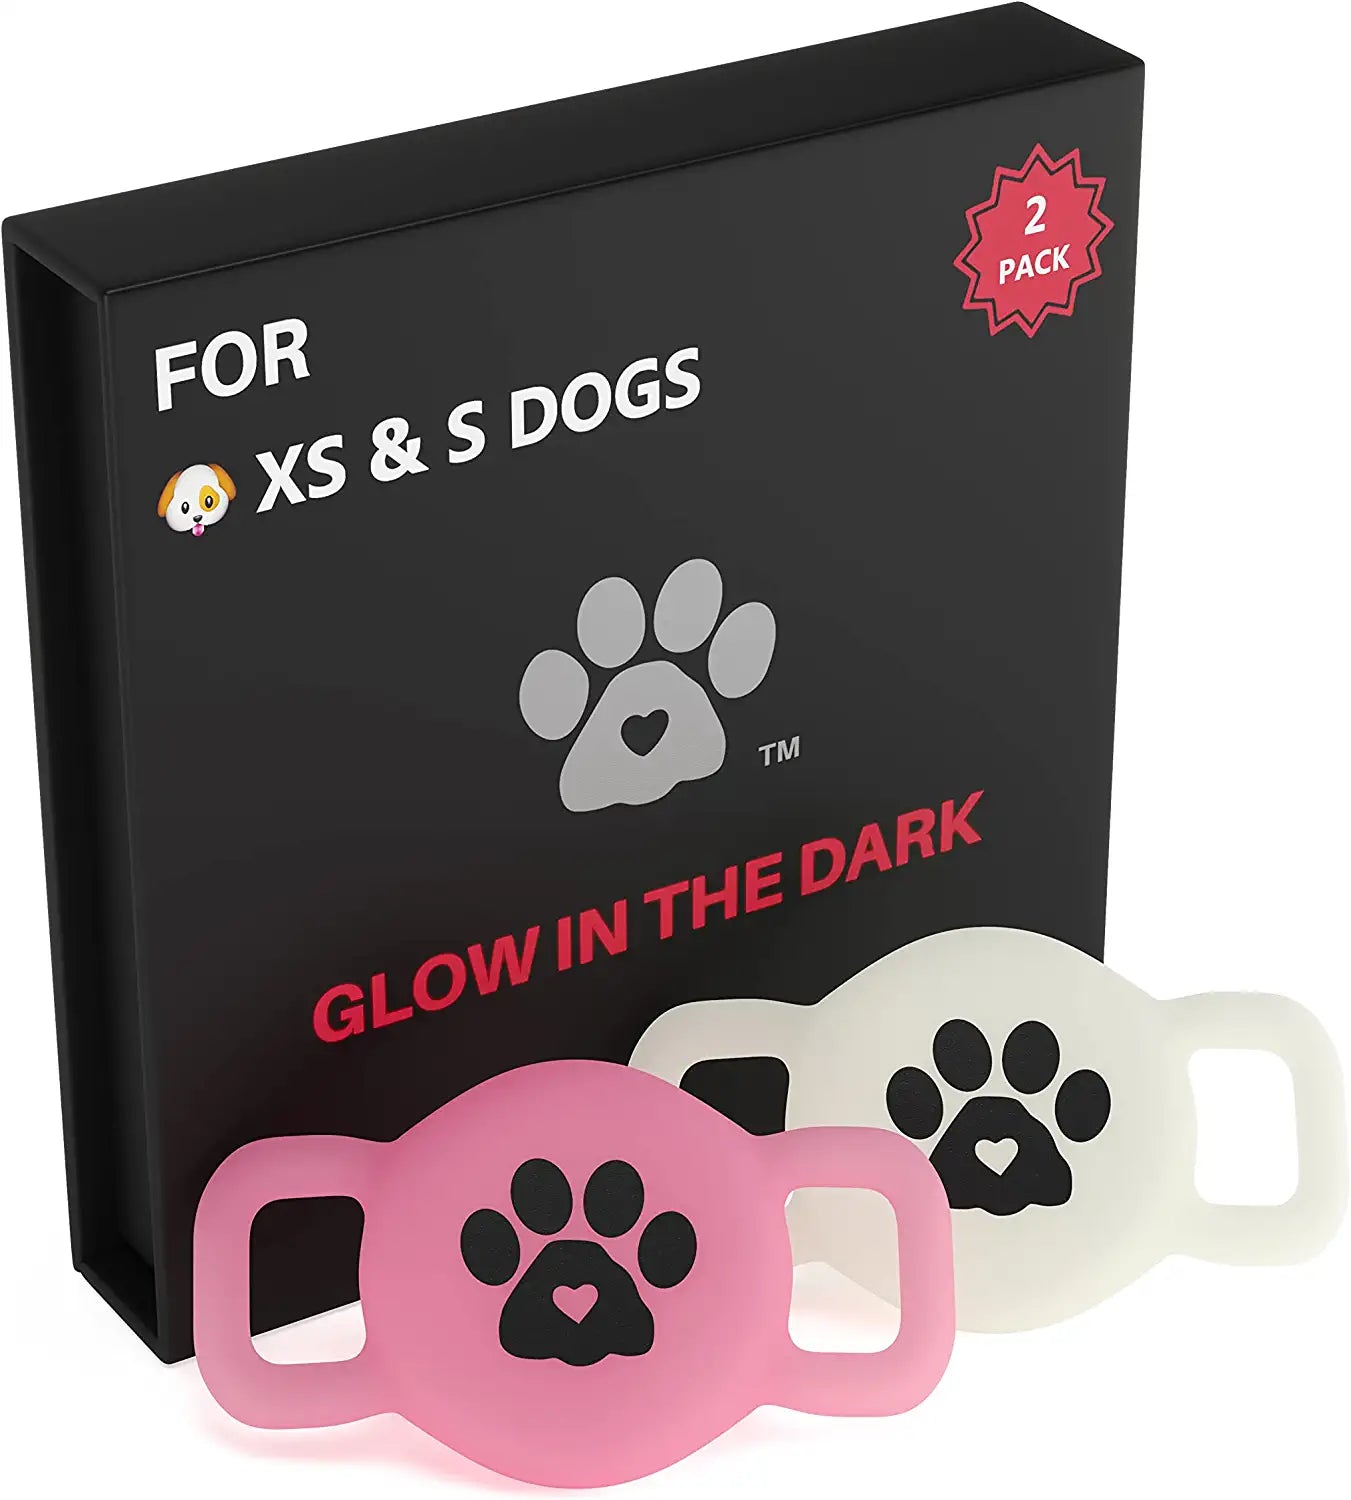 Airtag Dog Collar Holder – Available in Several Colors & Sizes - 2 Pack Silicone Dog Airtag Holder - Premium Dog Collar Airtag Holder - Apple Airtag Dog Collar Comfortably Fits Dogs & Cats Too! Electronics > GPS Accessories > GPS Cases LUVKO FAMILY Small- Cat, XS & S Dog, Light Pink & White (Glow In The Dark)  